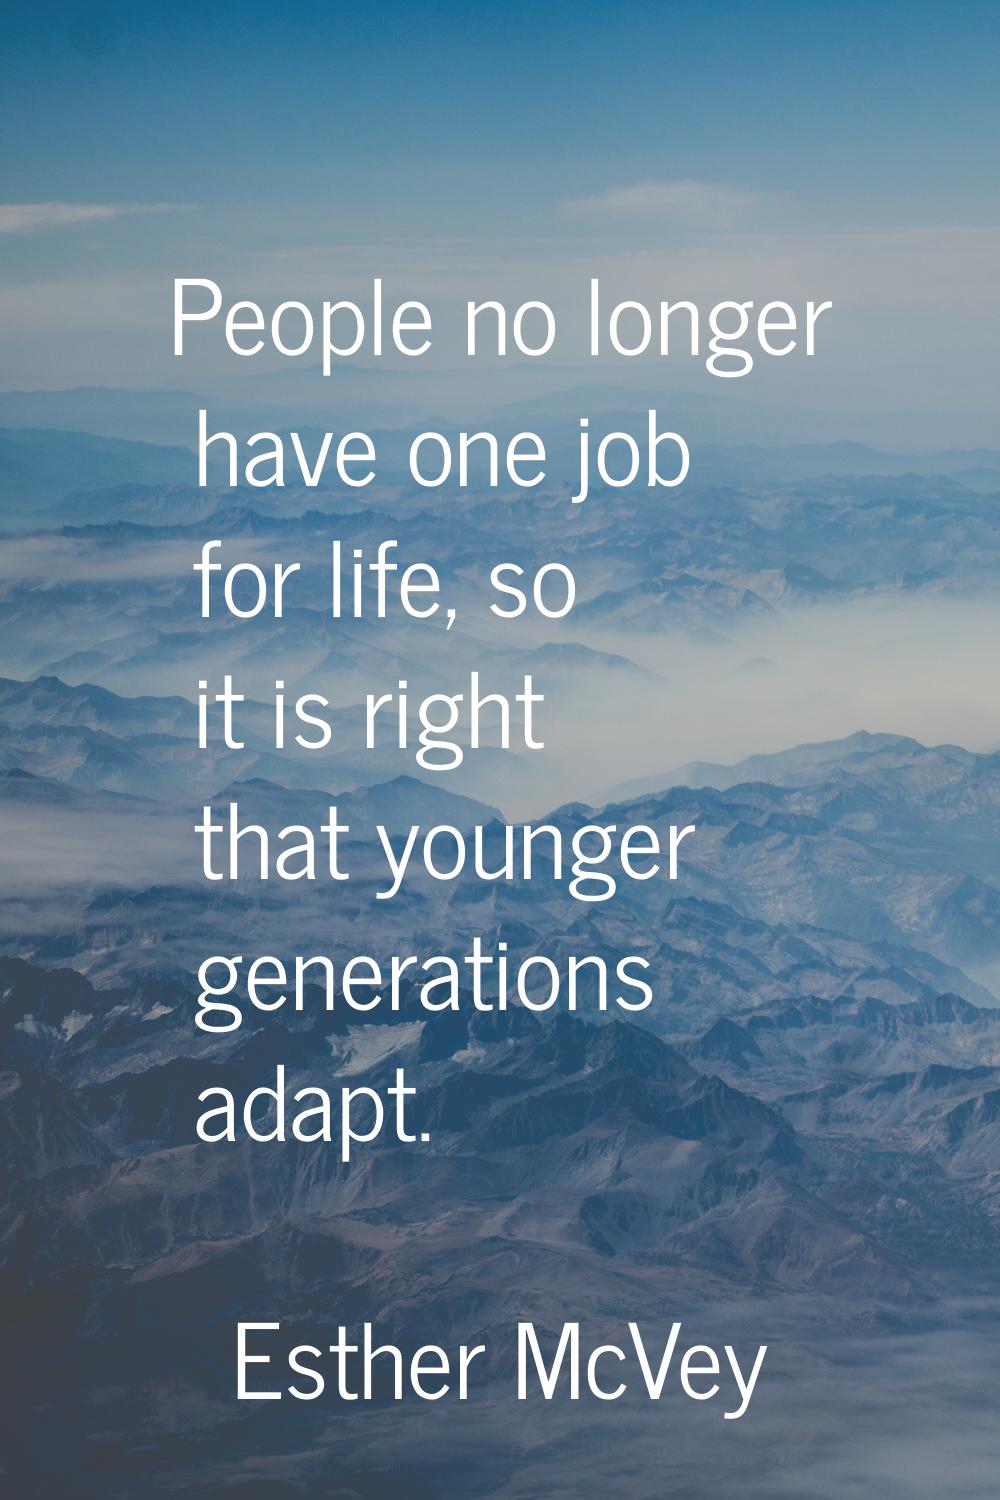 People no longer have one job for life, so it is right that younger generations adapt.